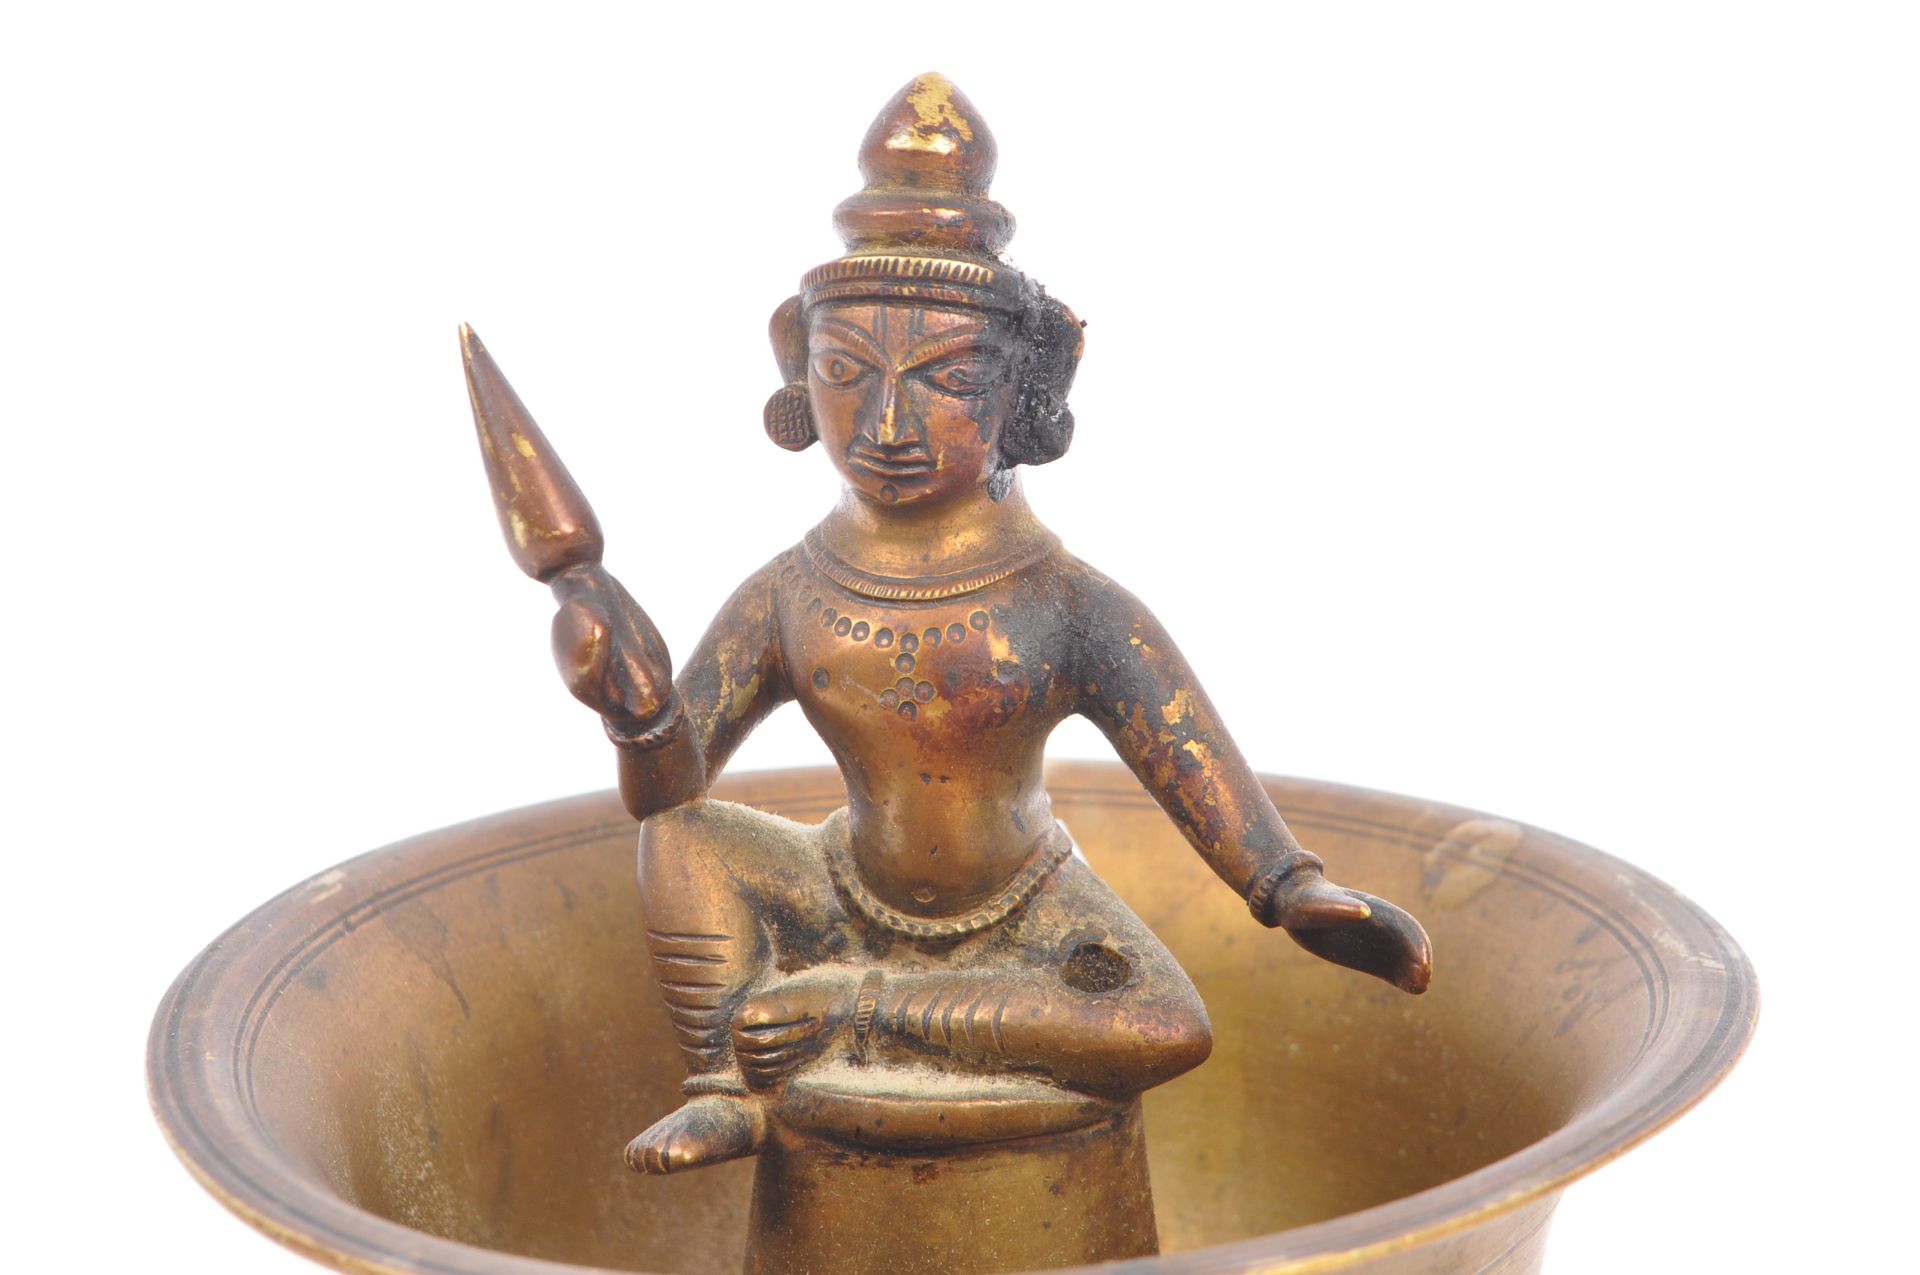 EARLY 20TH CENTURY INDIAN BRONZE BOWL INCENSE BURNER - Image 5 of 7